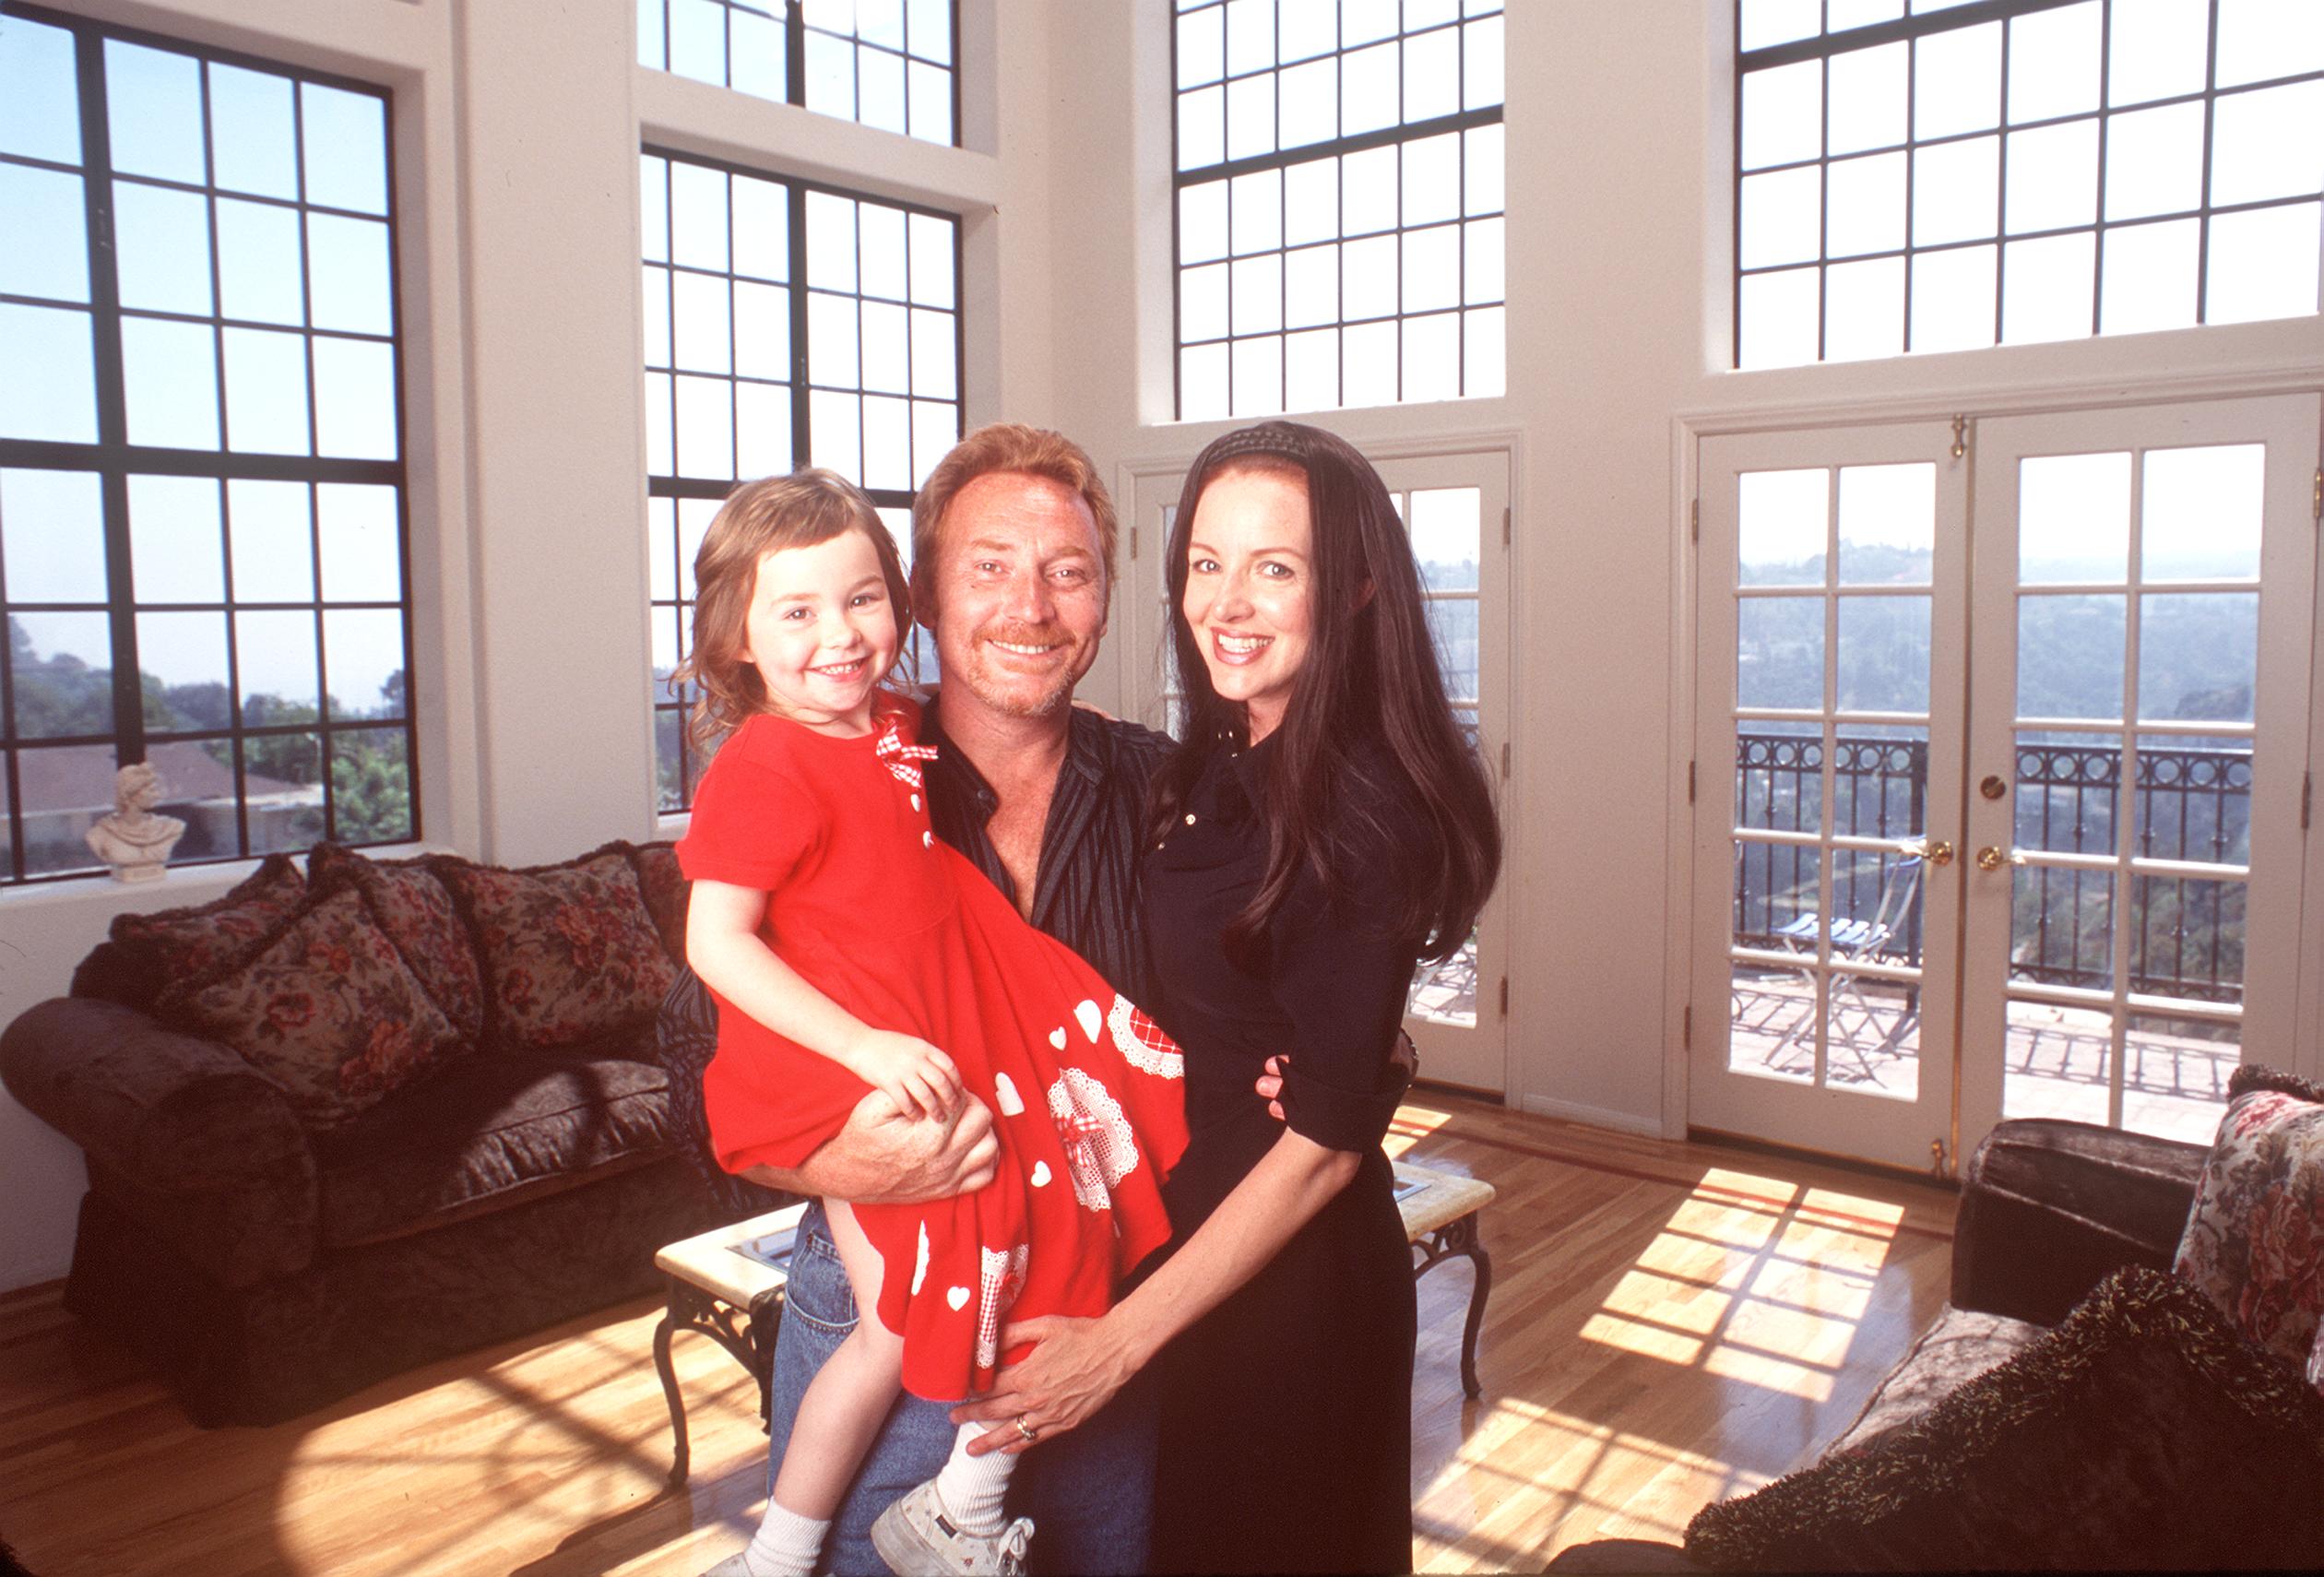 Former "Partridge Family" child star, Danny Bonaduce with his wife, Hillmer and daughter, Isabella at their new Hollywood Hills home. | Source: Getty Images